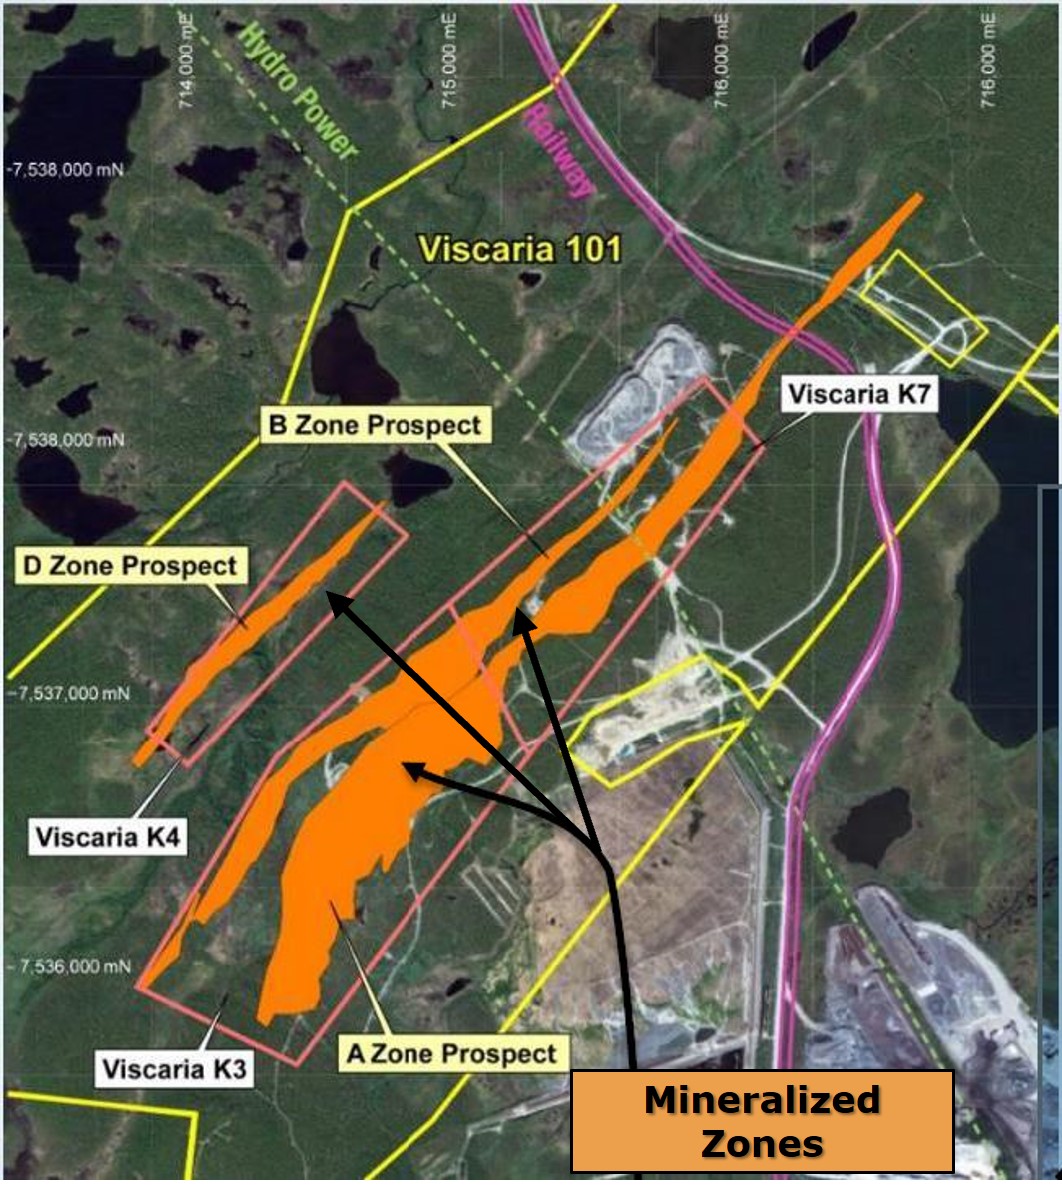 Mineralized zones of Viscaria